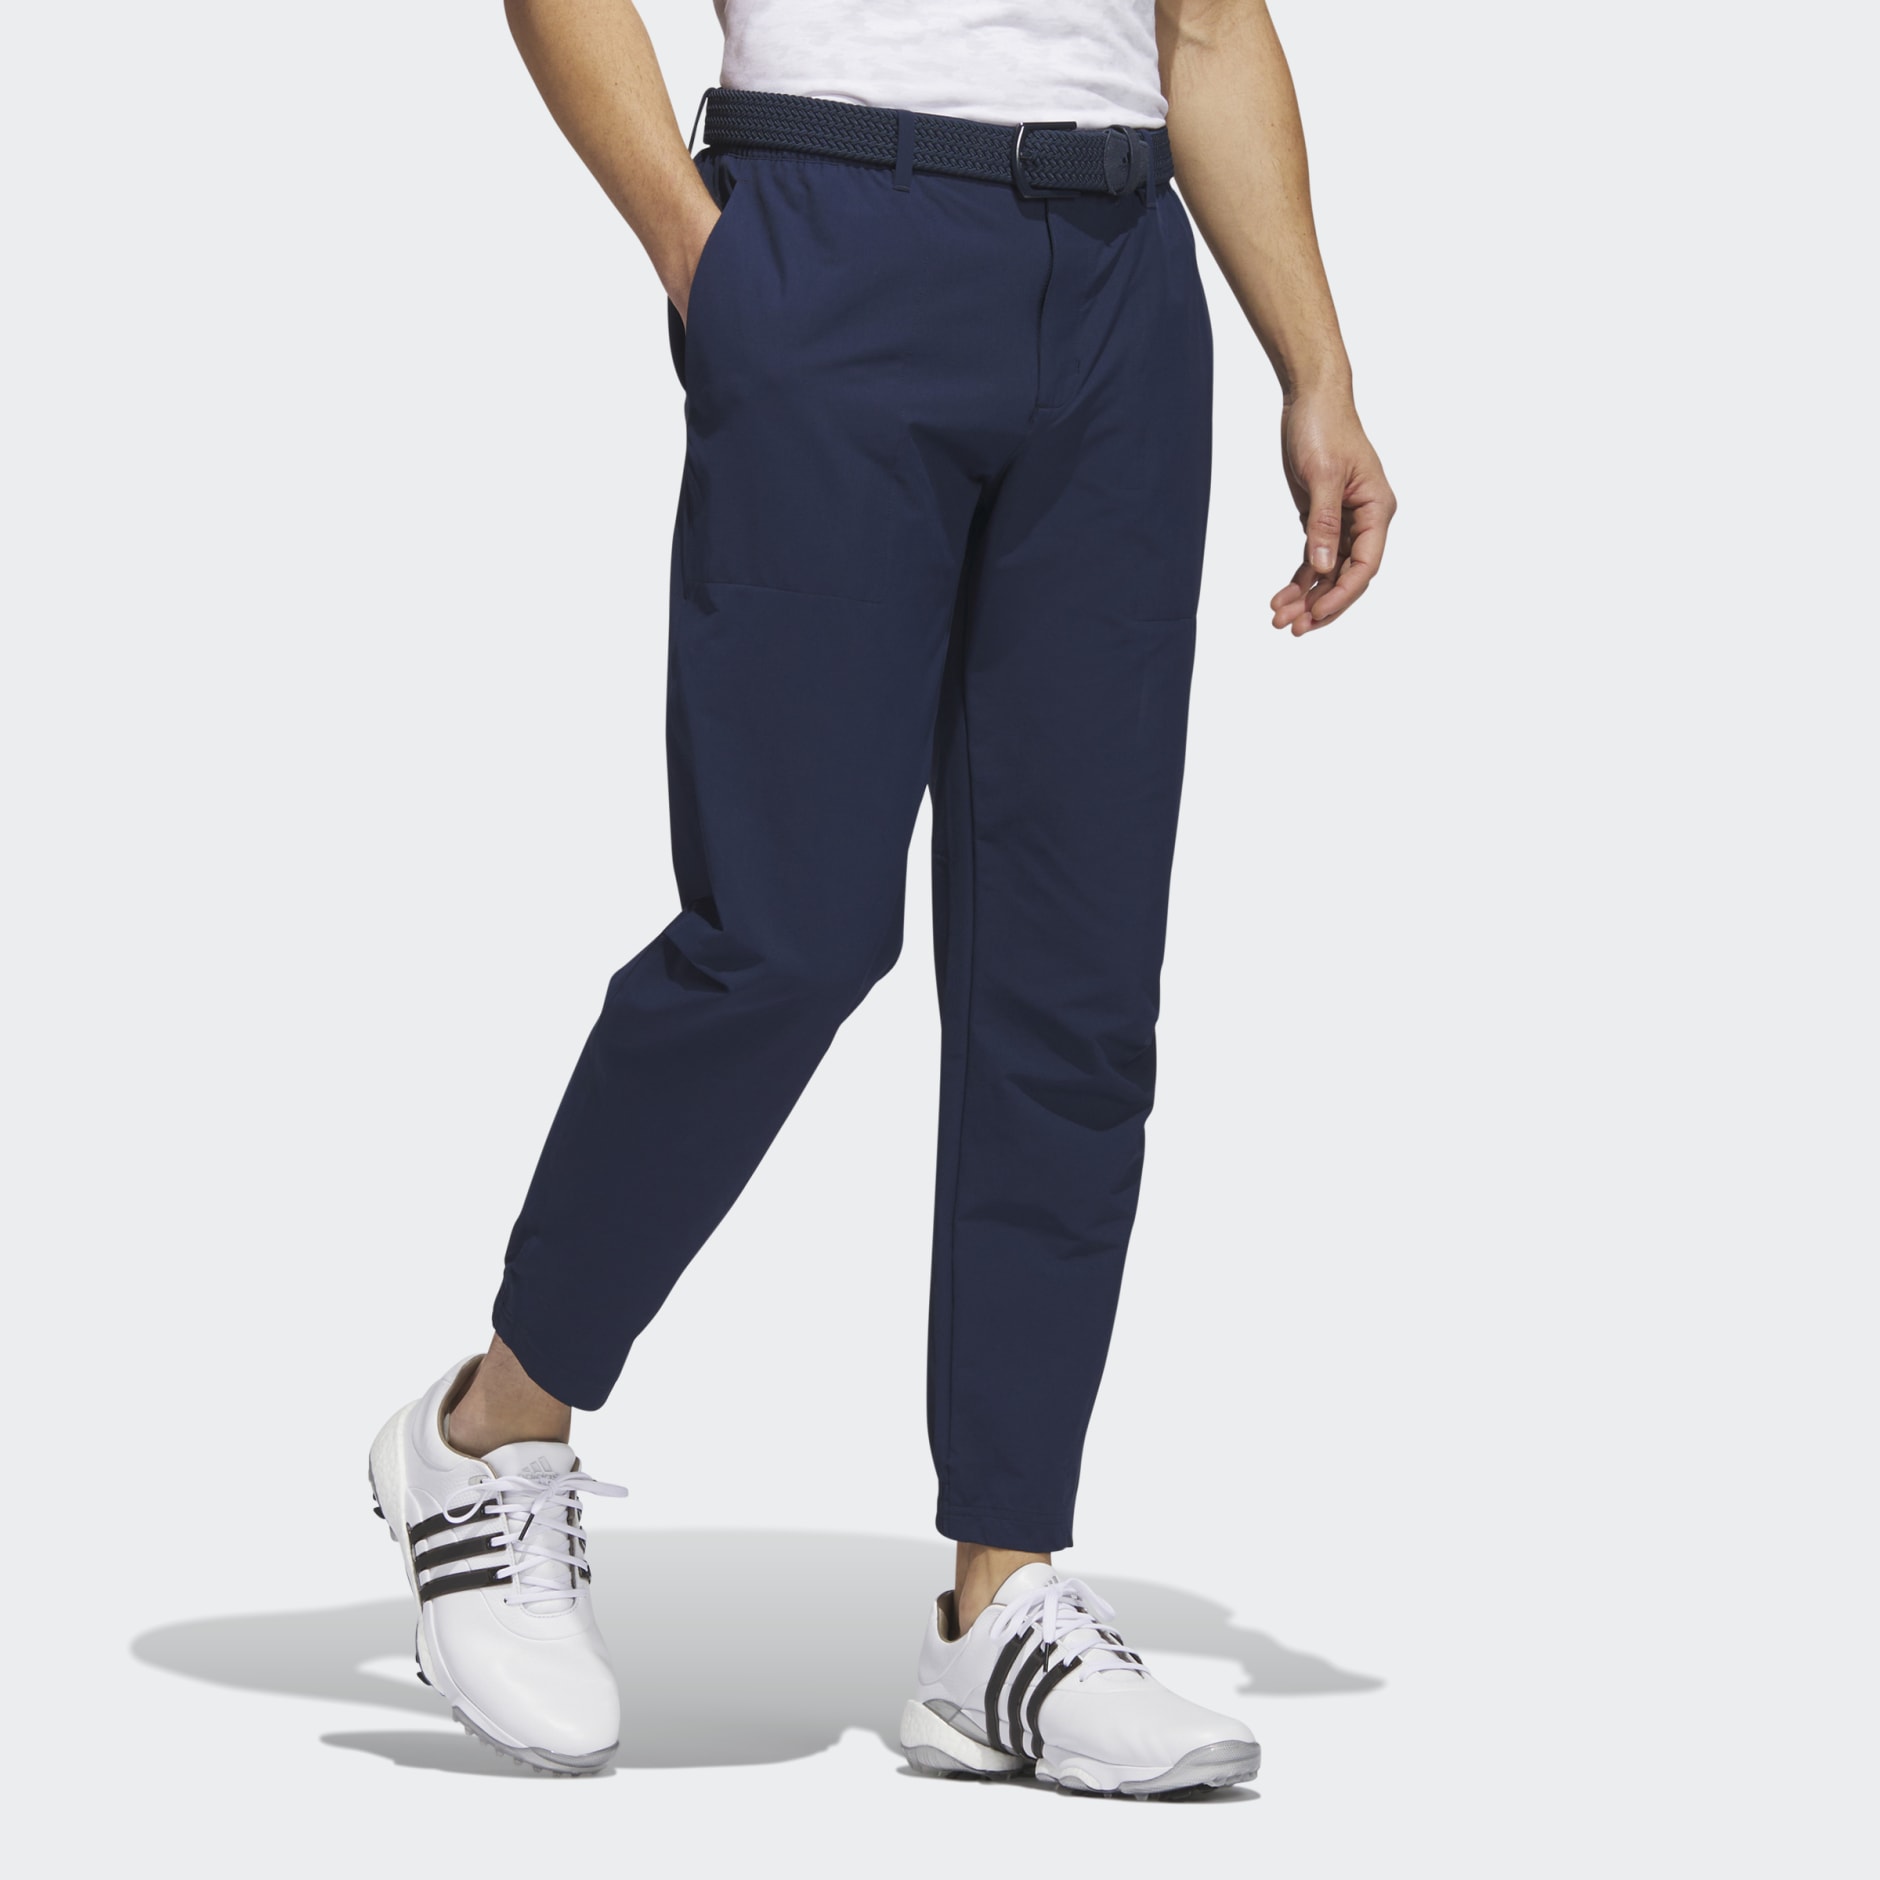 Clothing - Go-To Commuter Golf Pants - Blue